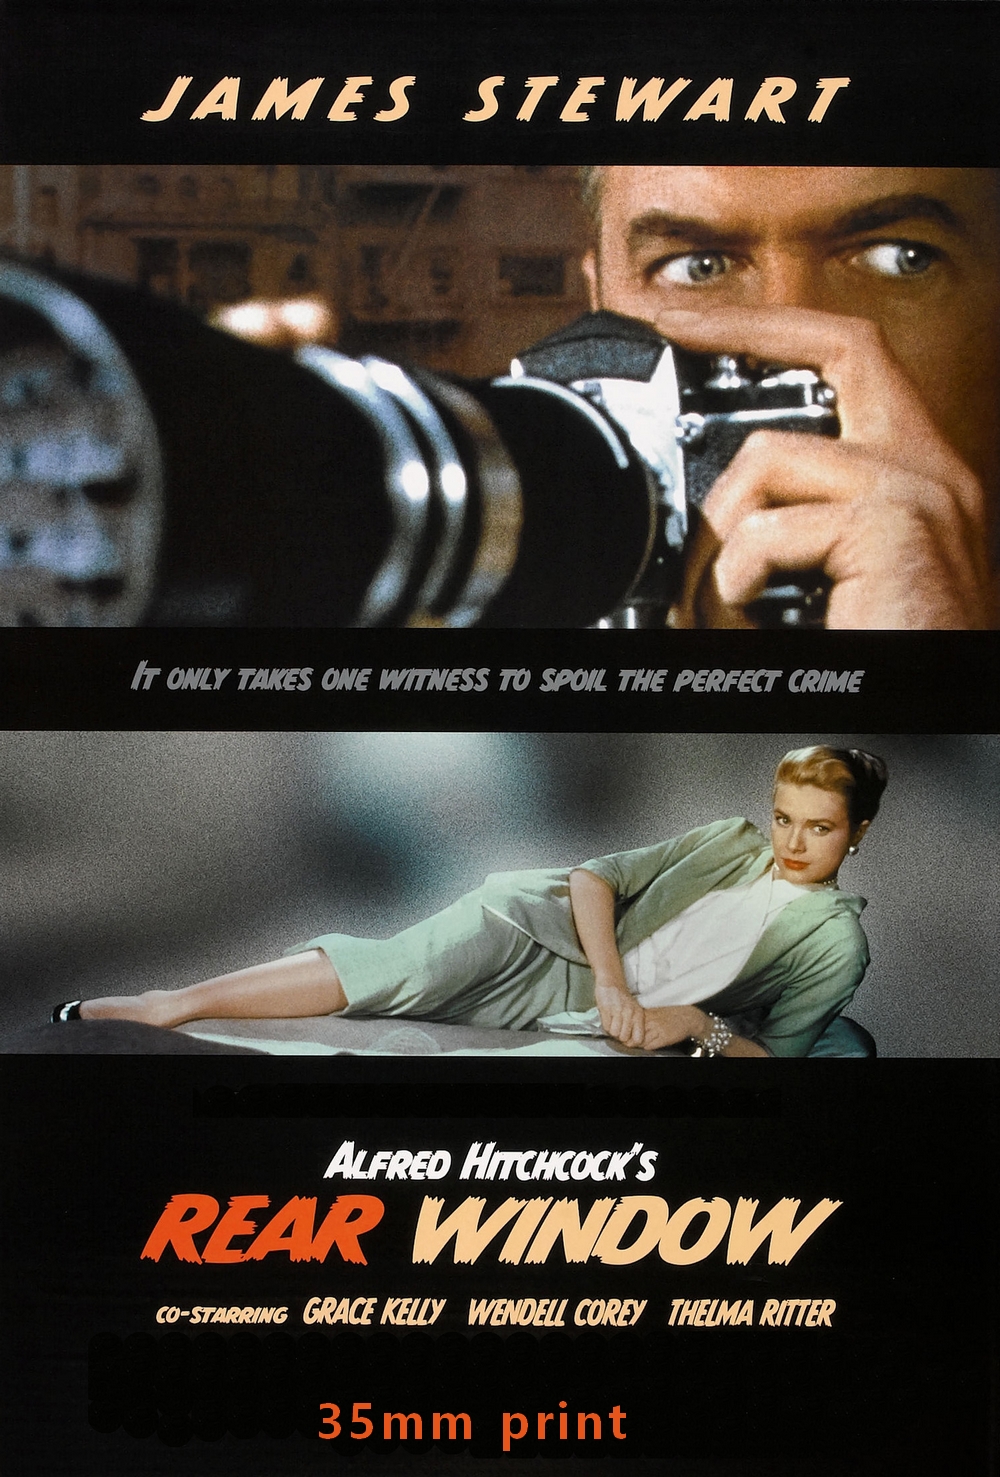 Hitchcock’s REAR WINDOW projected in 35mm